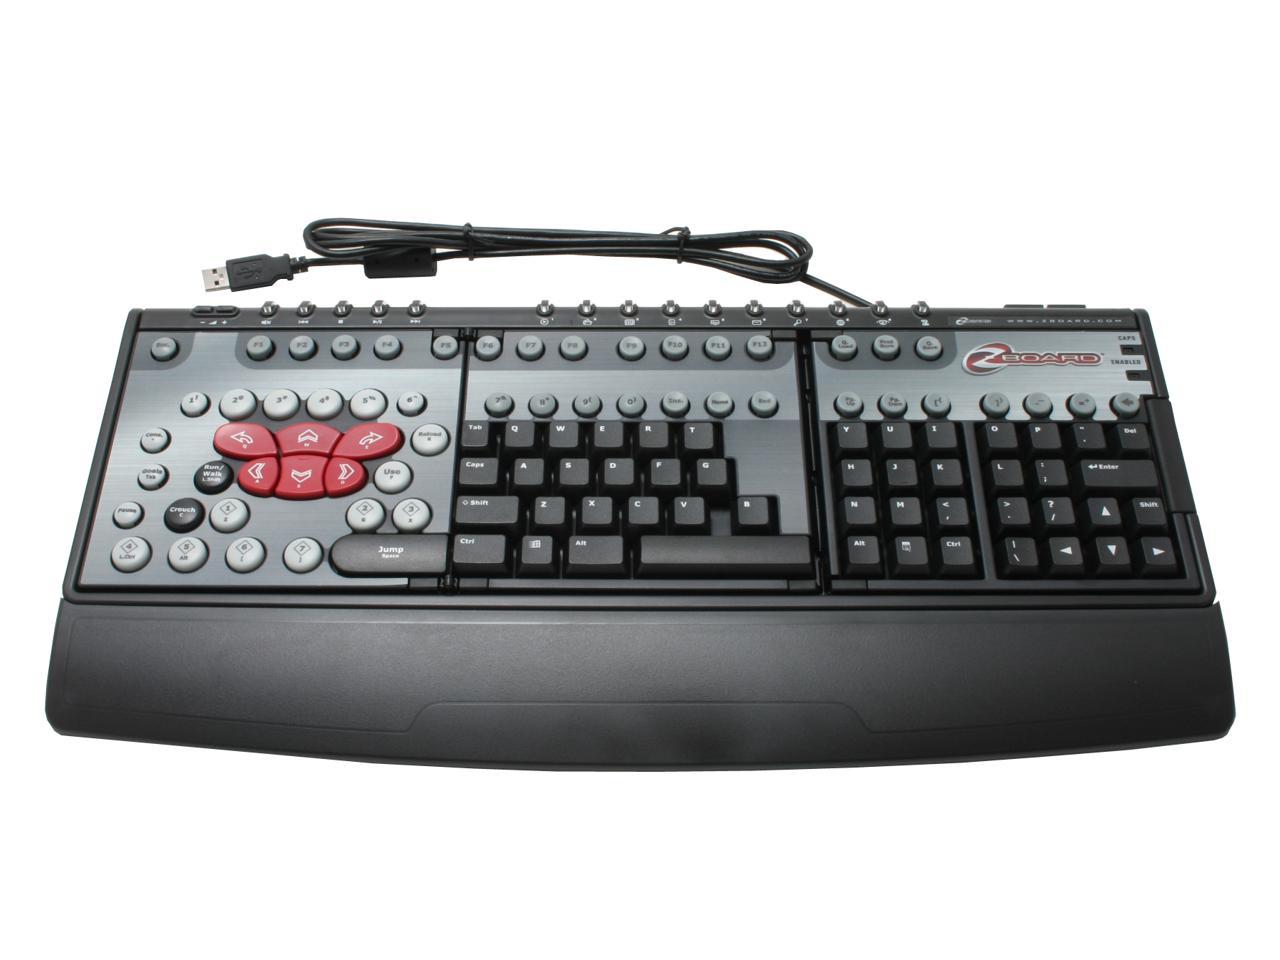 Steelseries Zboard Gaming Keyboard - PW1USE1-B3ZBD01 2-Tone USB Wired 